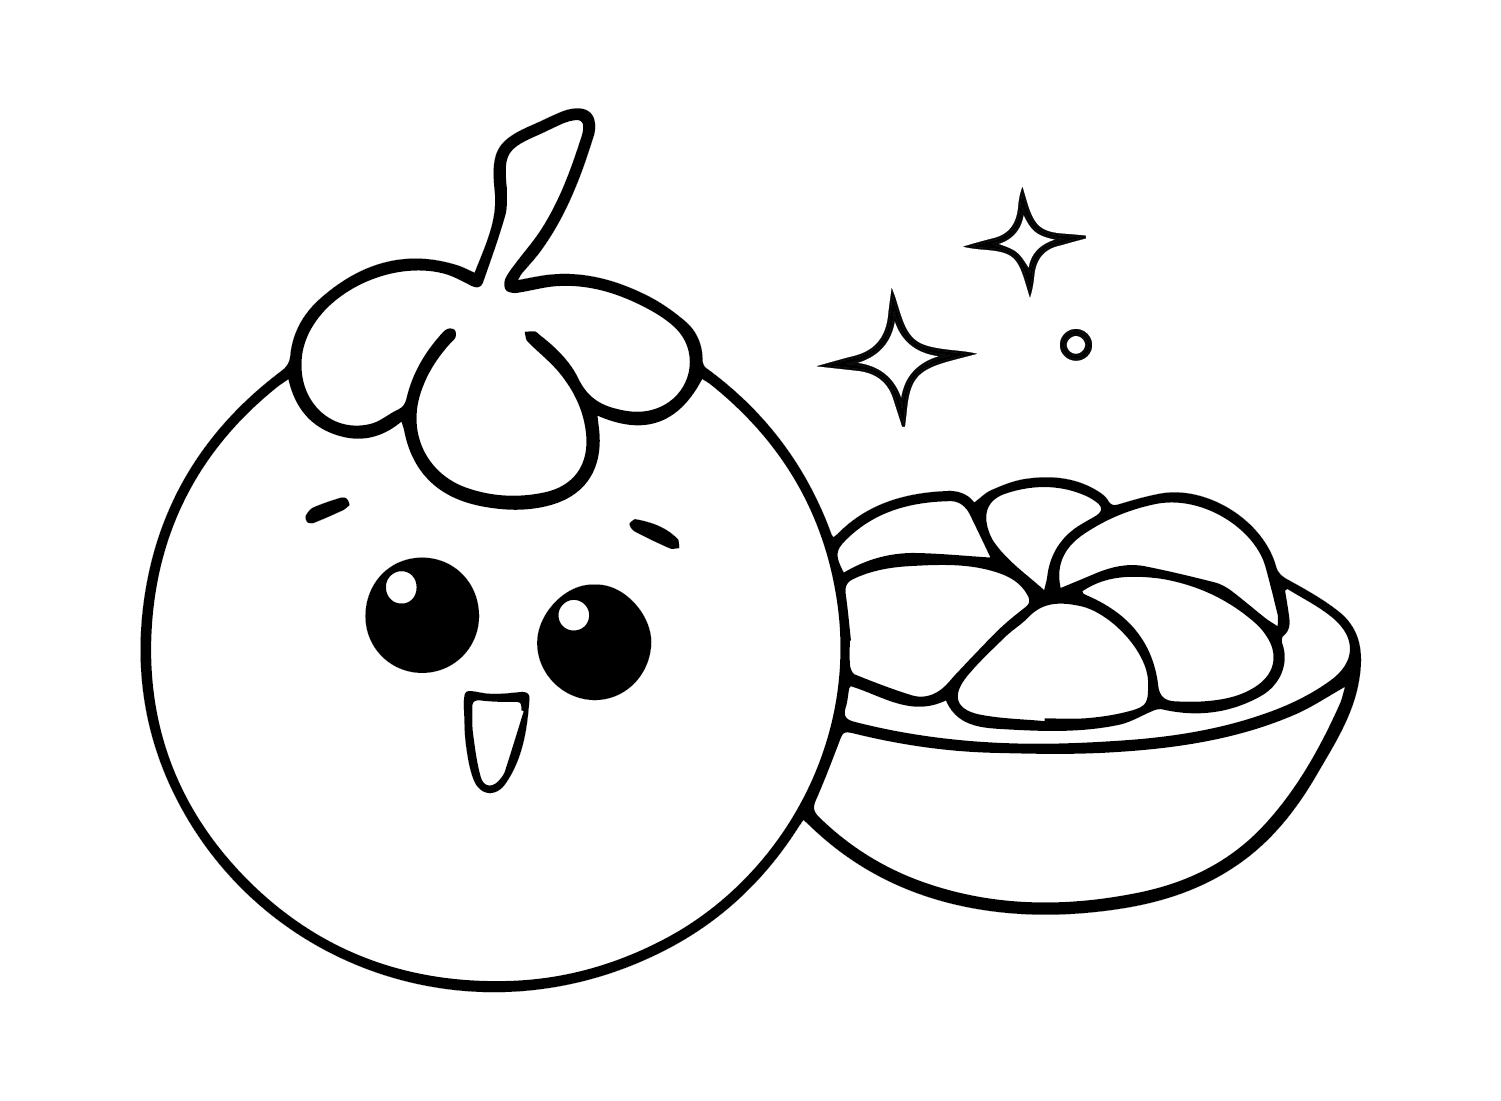 Mangosteen coloring pages printable for free download